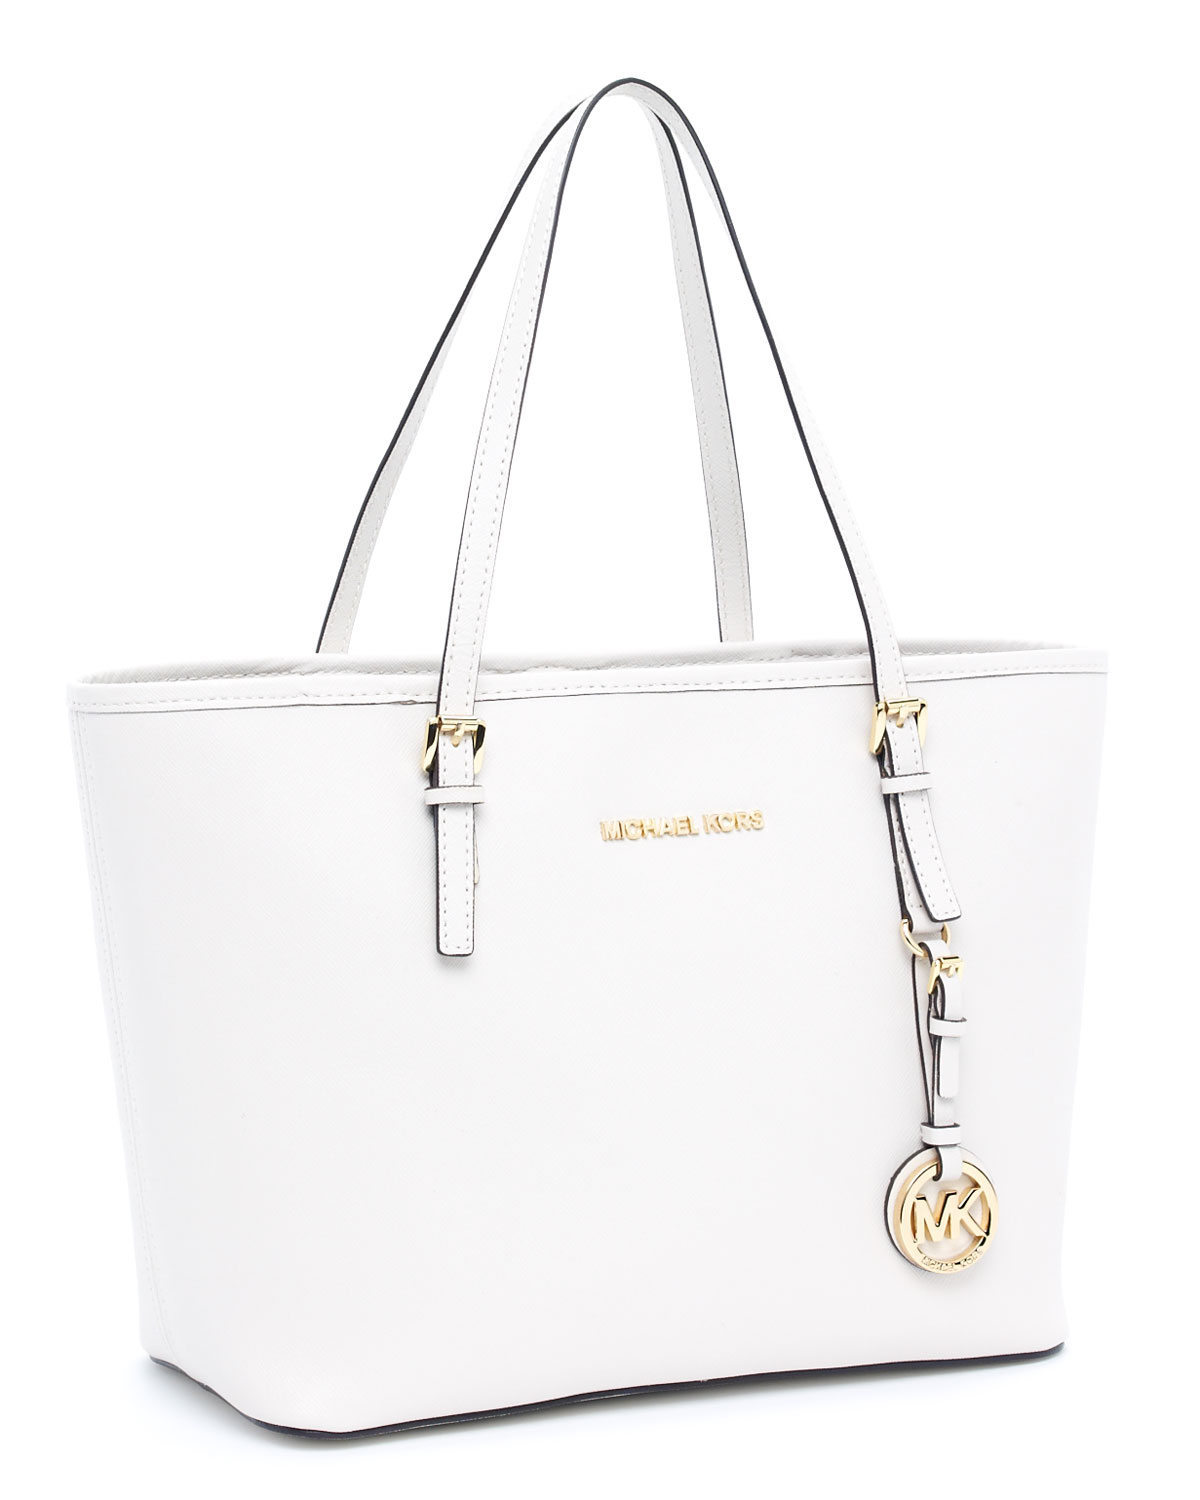 Michael Kors Jet Set Travel Small Travel Tote in White - Lyst